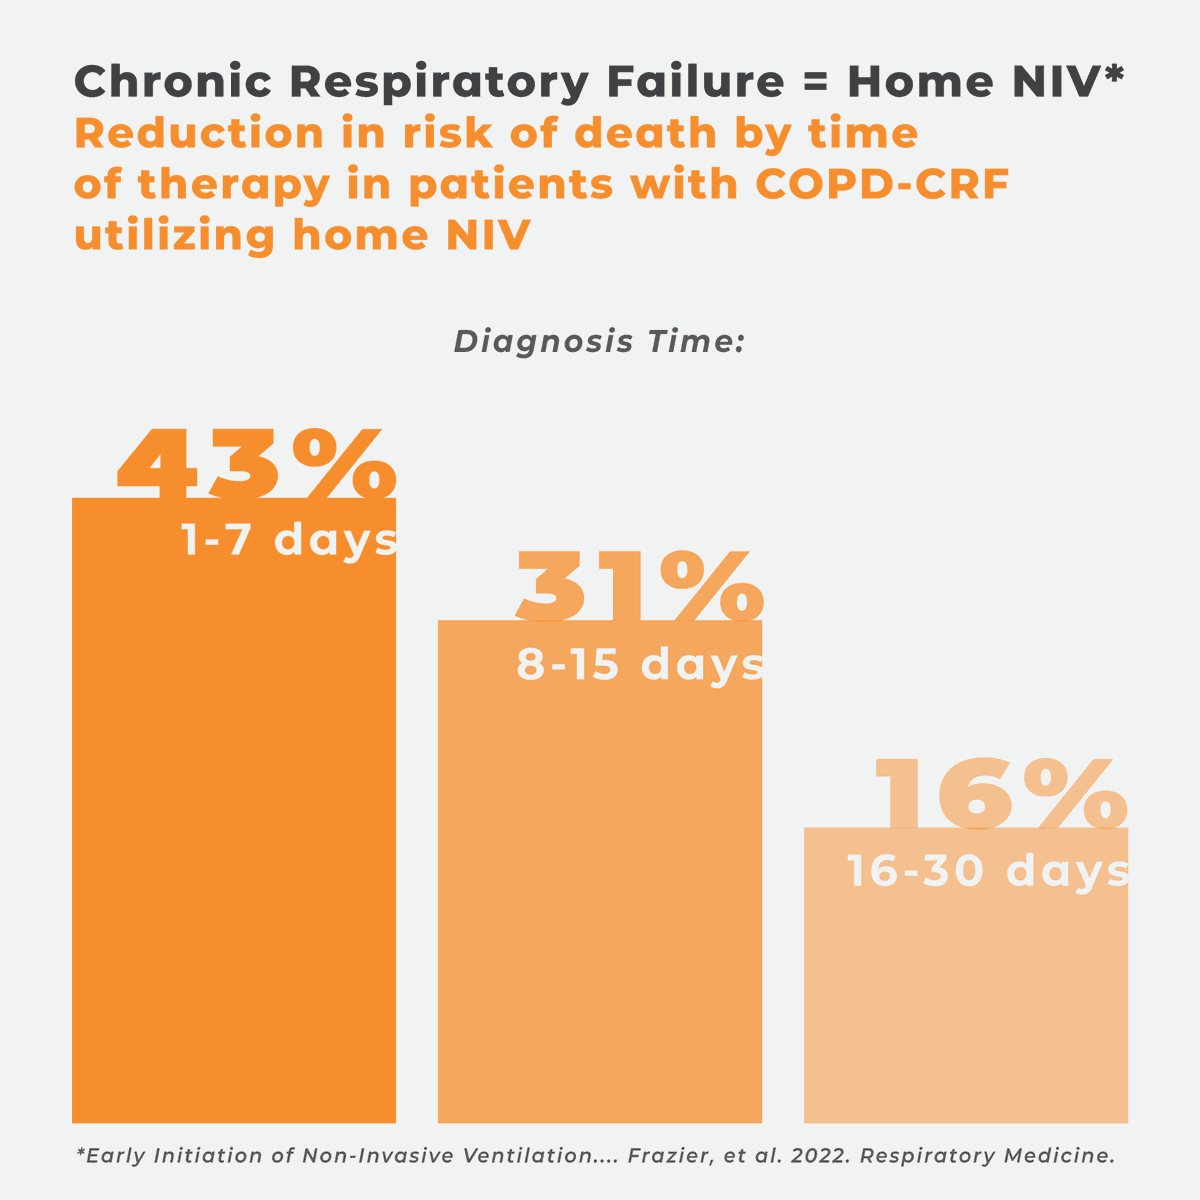 Time is invaluable when patients are diagnosed with Chronic Respiratory Failure.
#CRF #TeleRespiratory #EncoreHealthcare #Nexus #HomeRespiratoryCare #ChronicIllness #ChronicDisease #RespiratoryCare #HomeMedicalEquipment #DurableMedicalEquipment